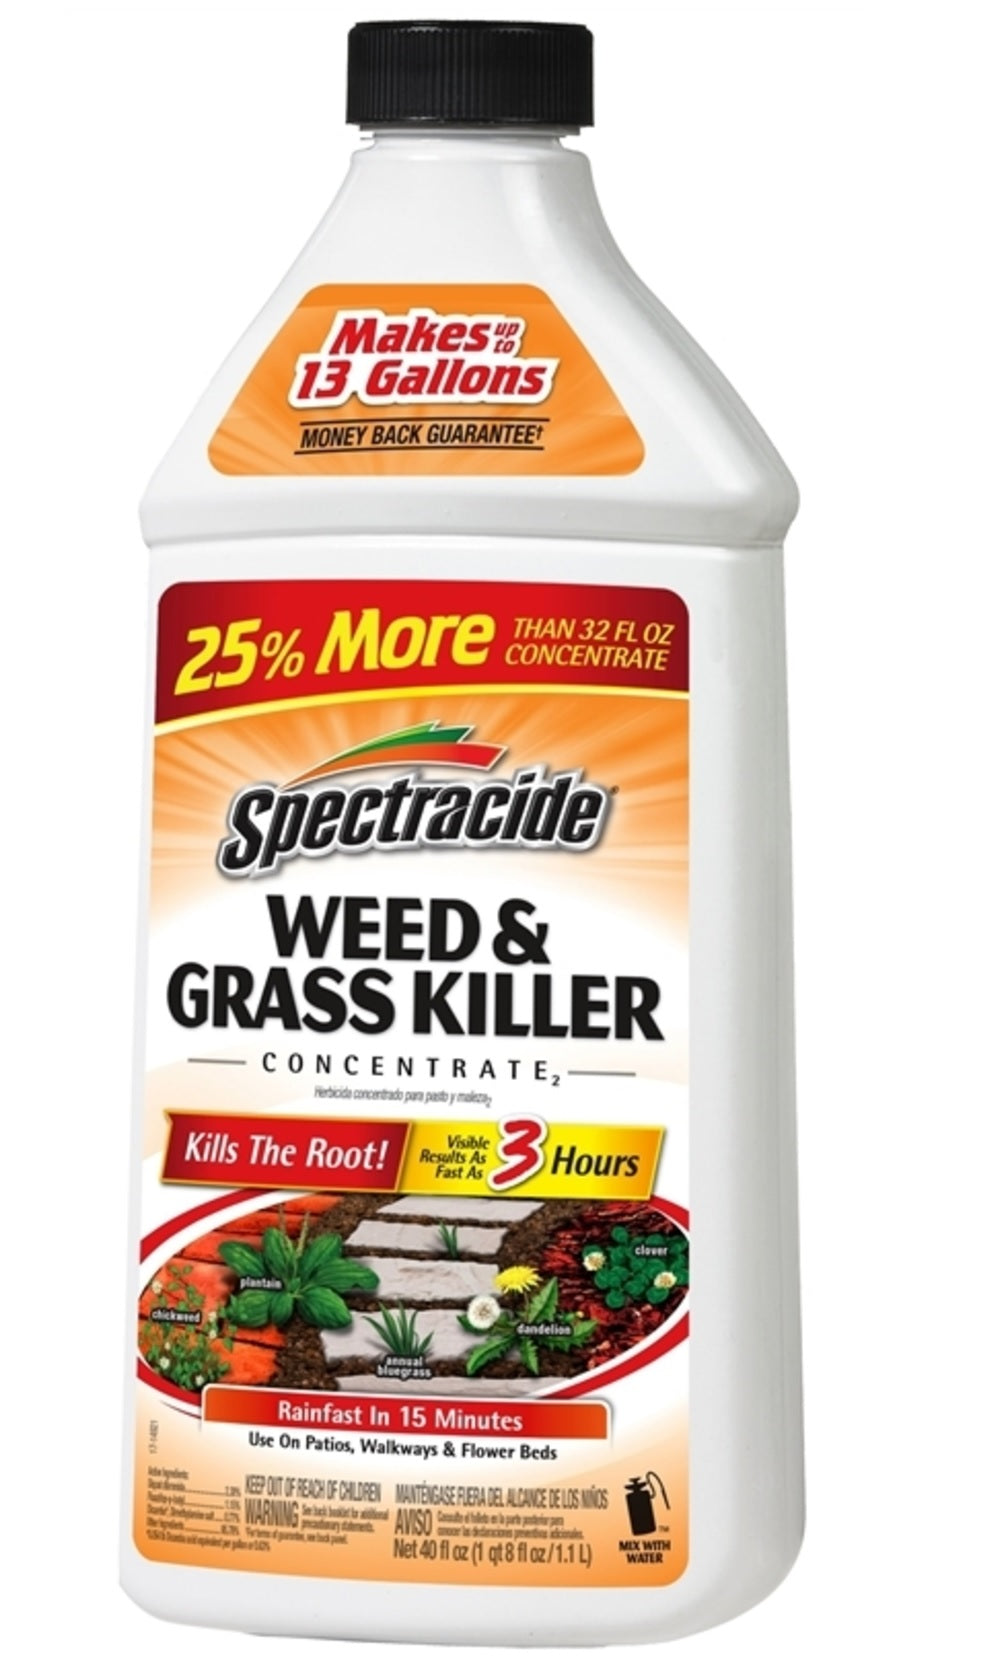 Spectracide HG-56009 Concentrate Weed & Grass Killer, 40 Oz